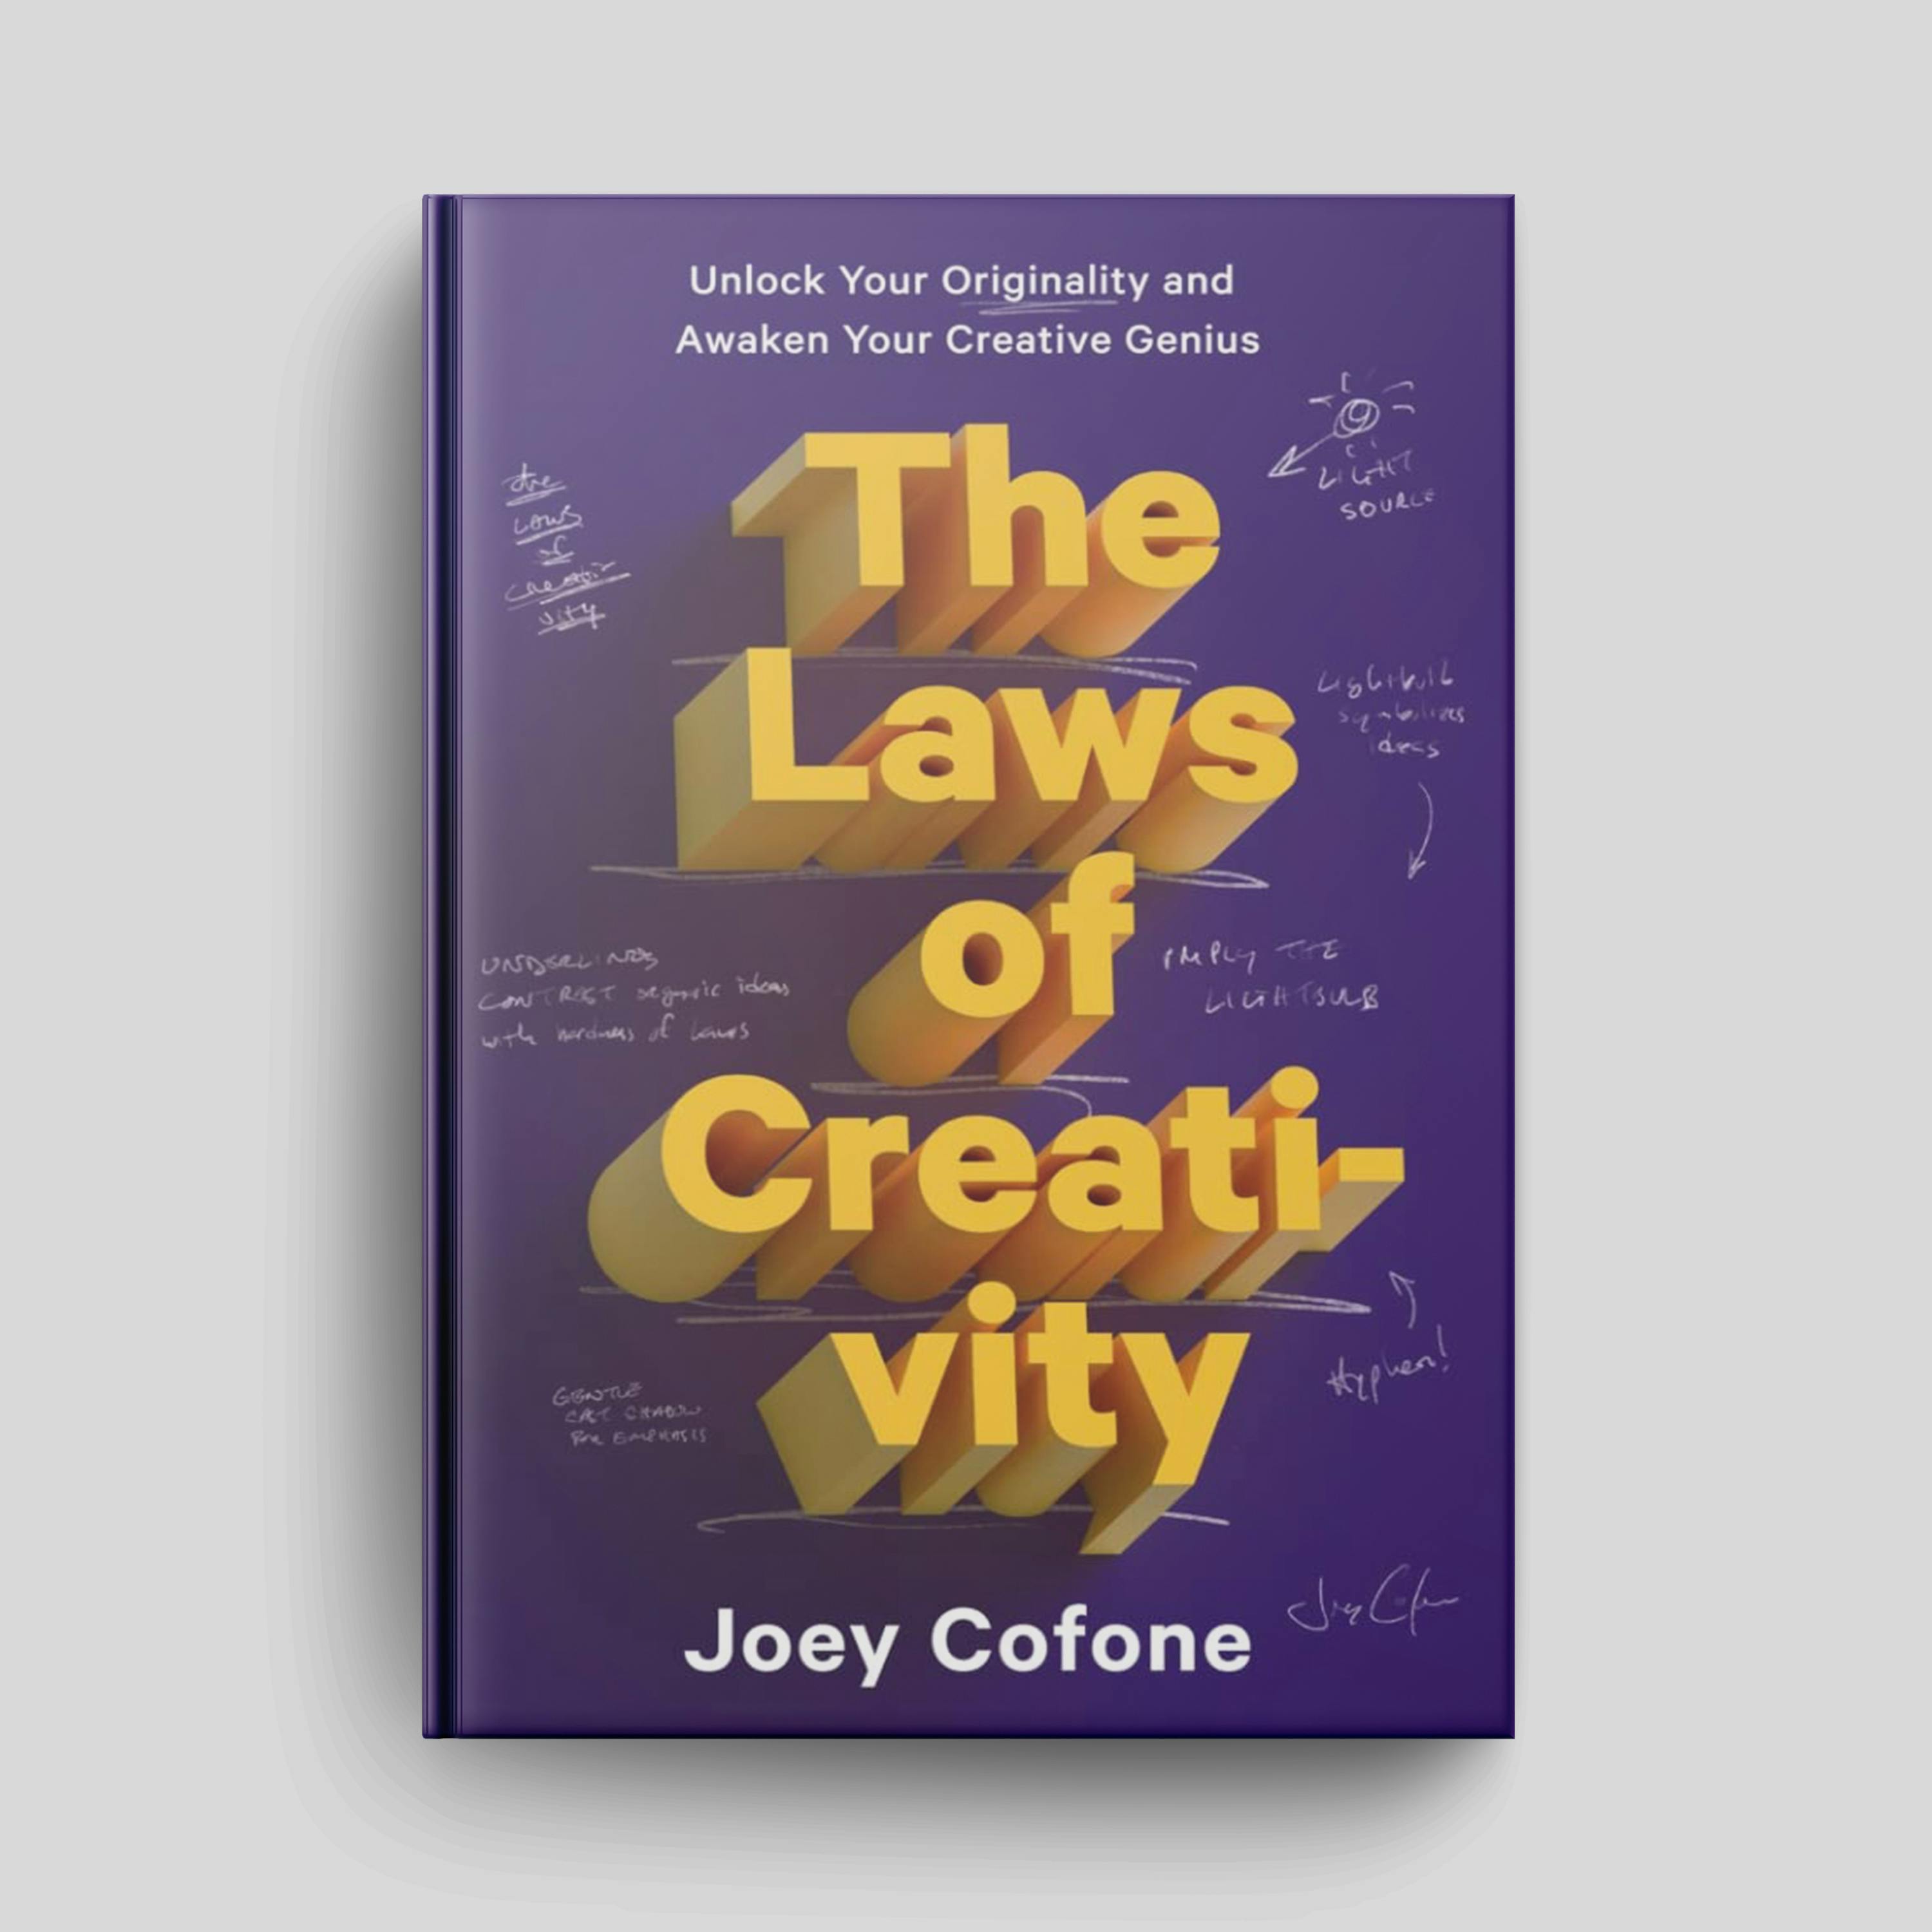 Book: ”The Laws of Creativity: How to Unlock Your Originality and Awaken Your Creative Genius” | Episode #142